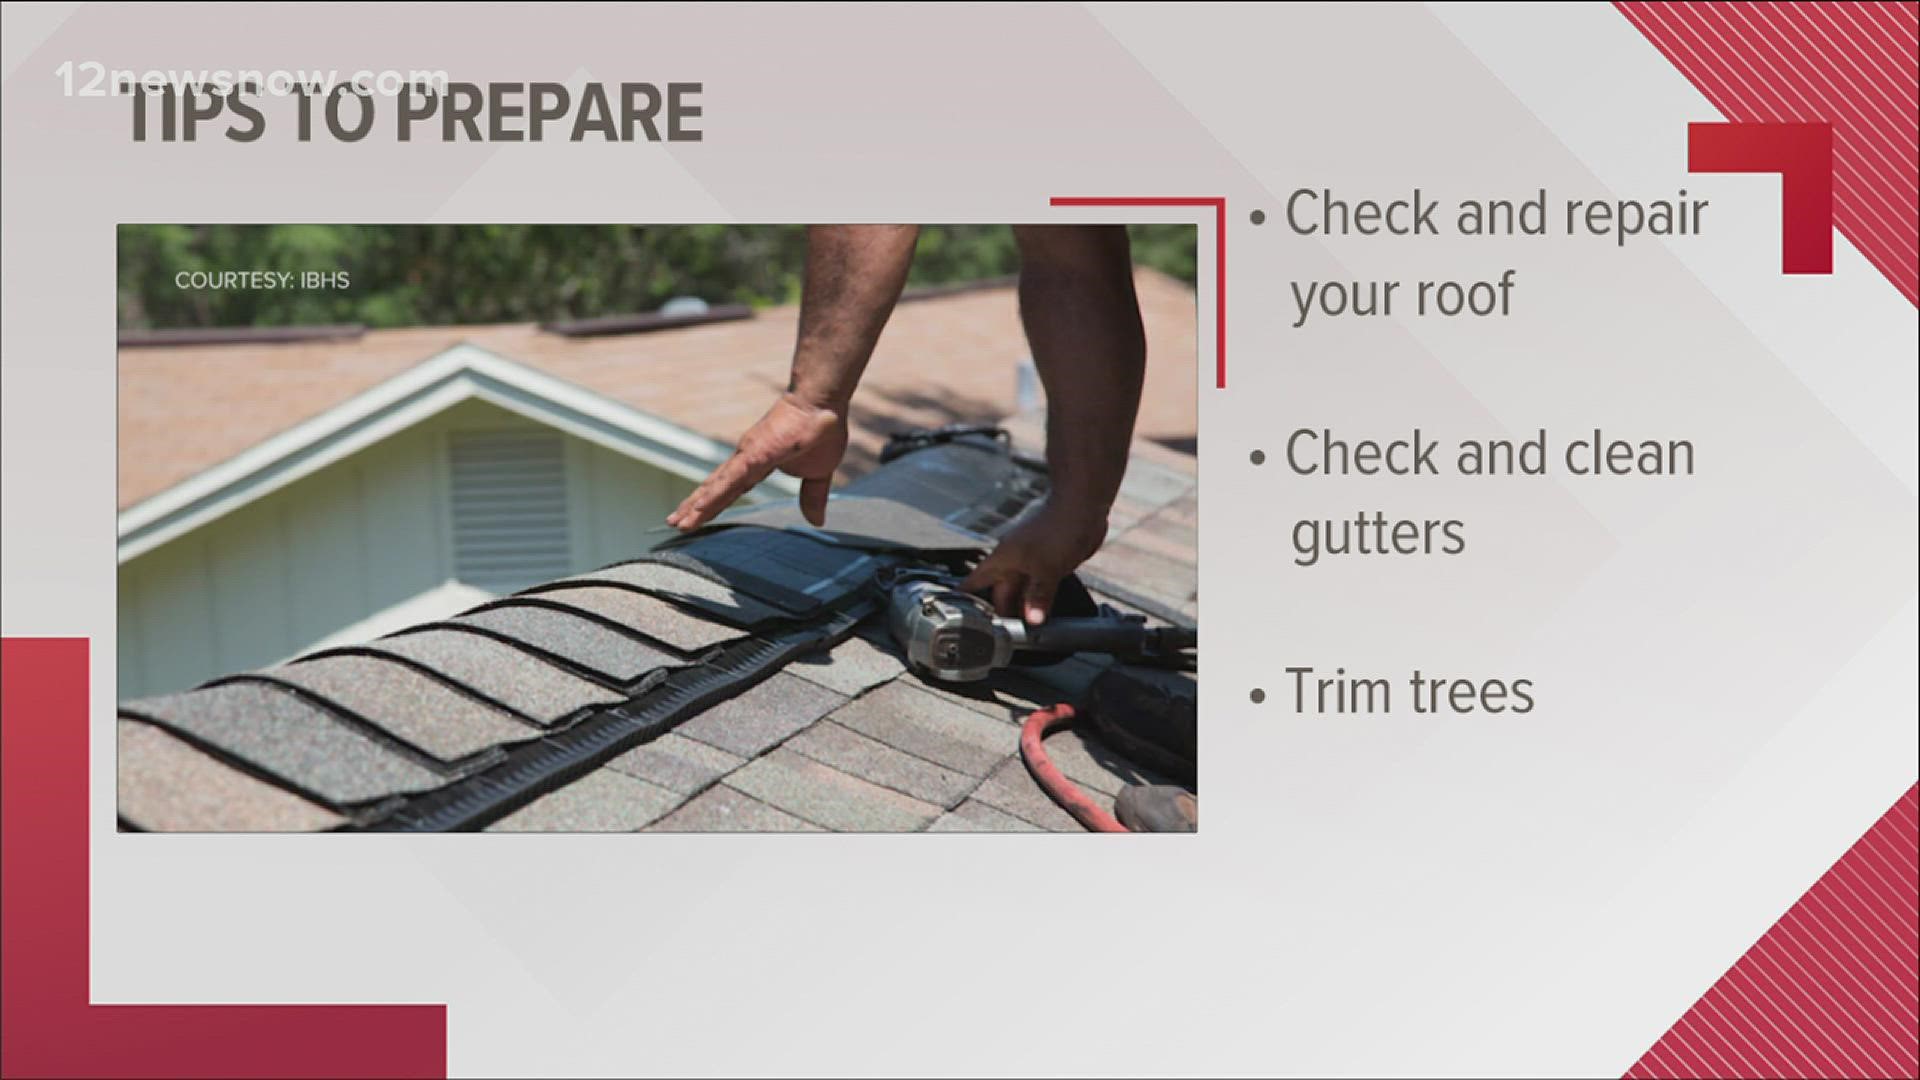 Southeast Texans are encouraged to check their gutters, roofs and to trim trees.